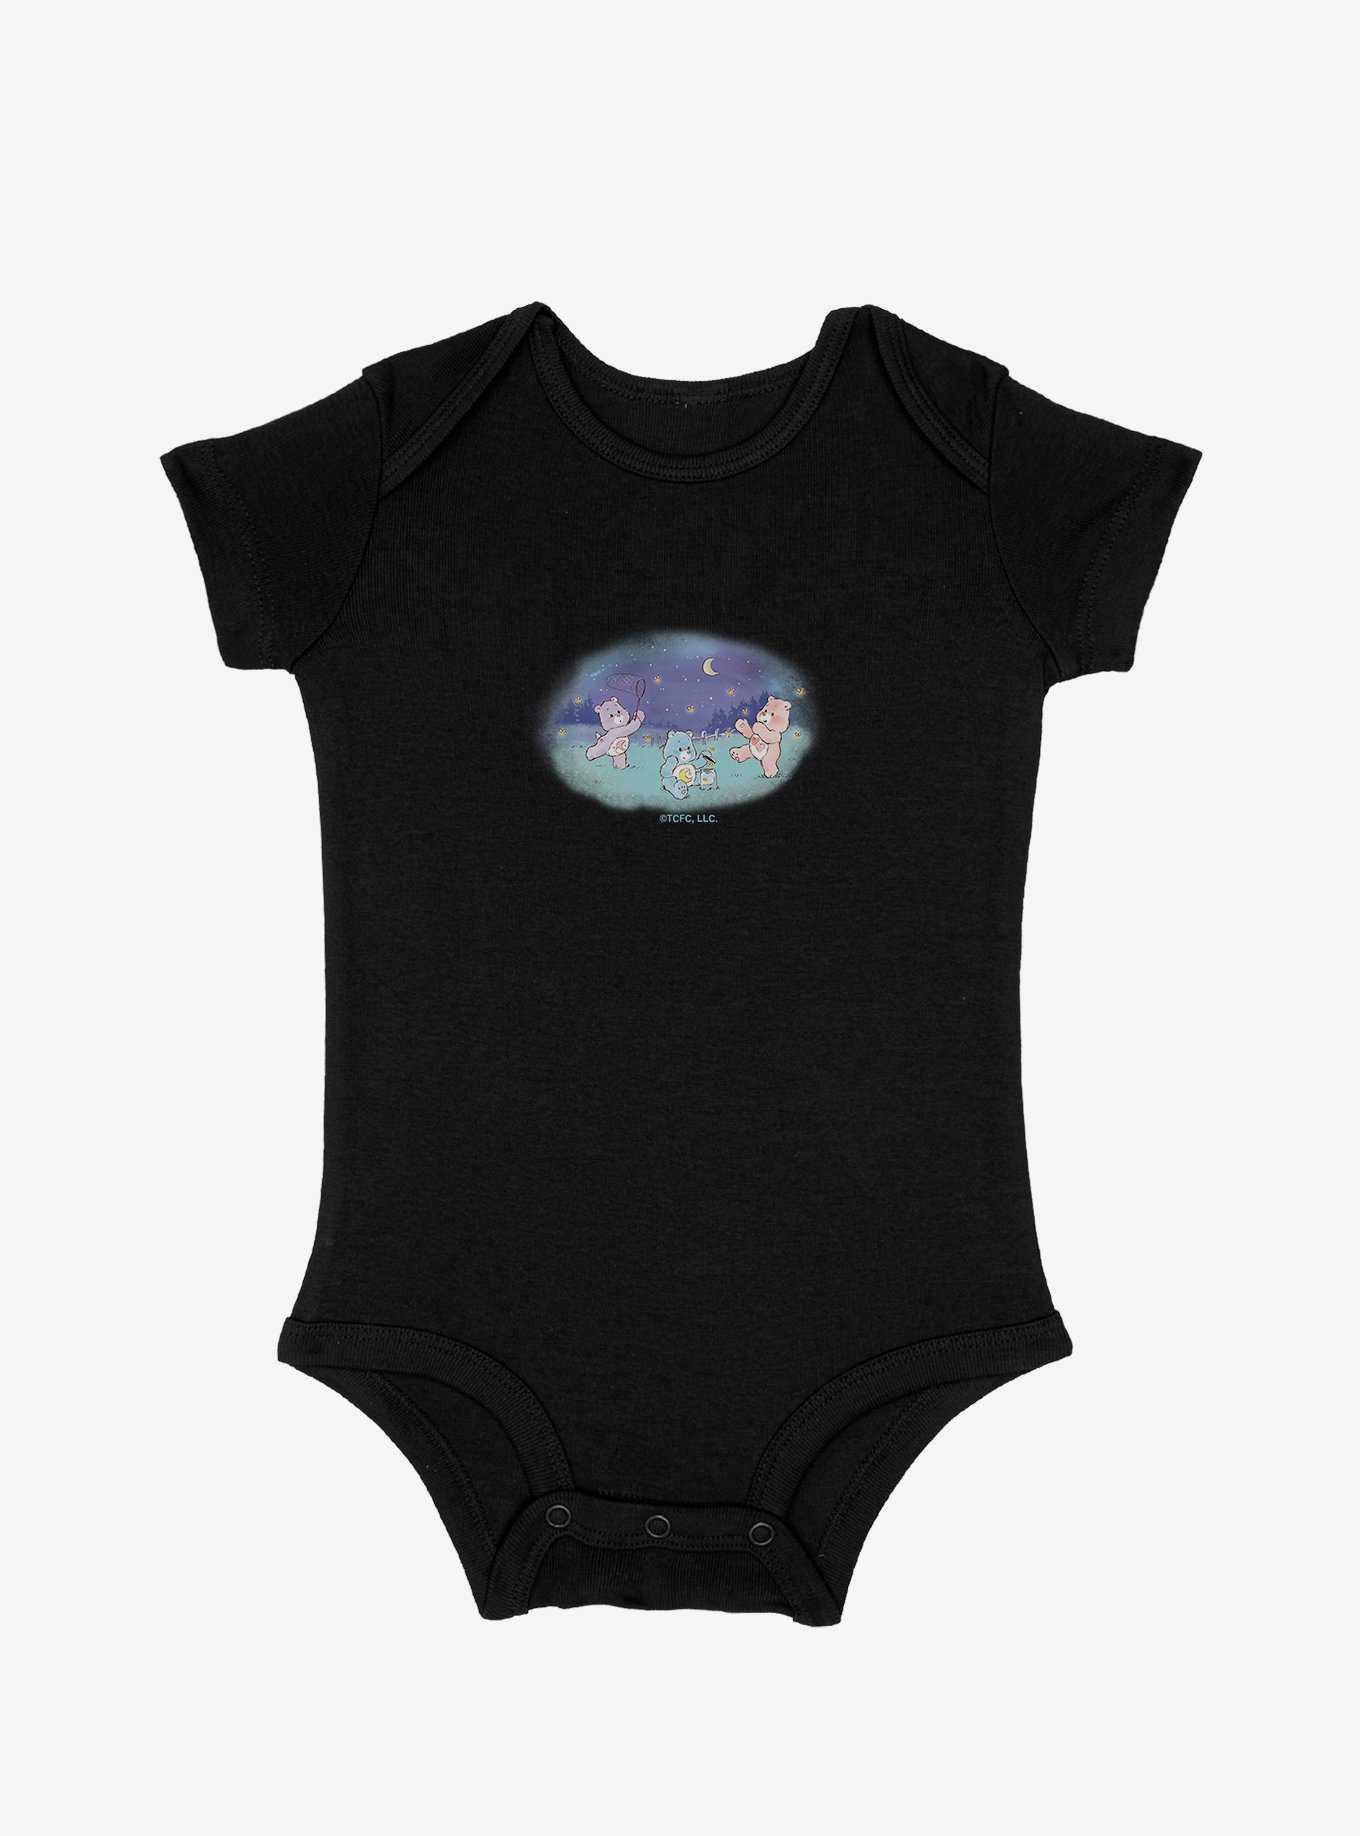 Care Bears Sweet Dreams Bedtime And Love-A-Lot Catching Fireflies Infant Bodysuit, , hi-res